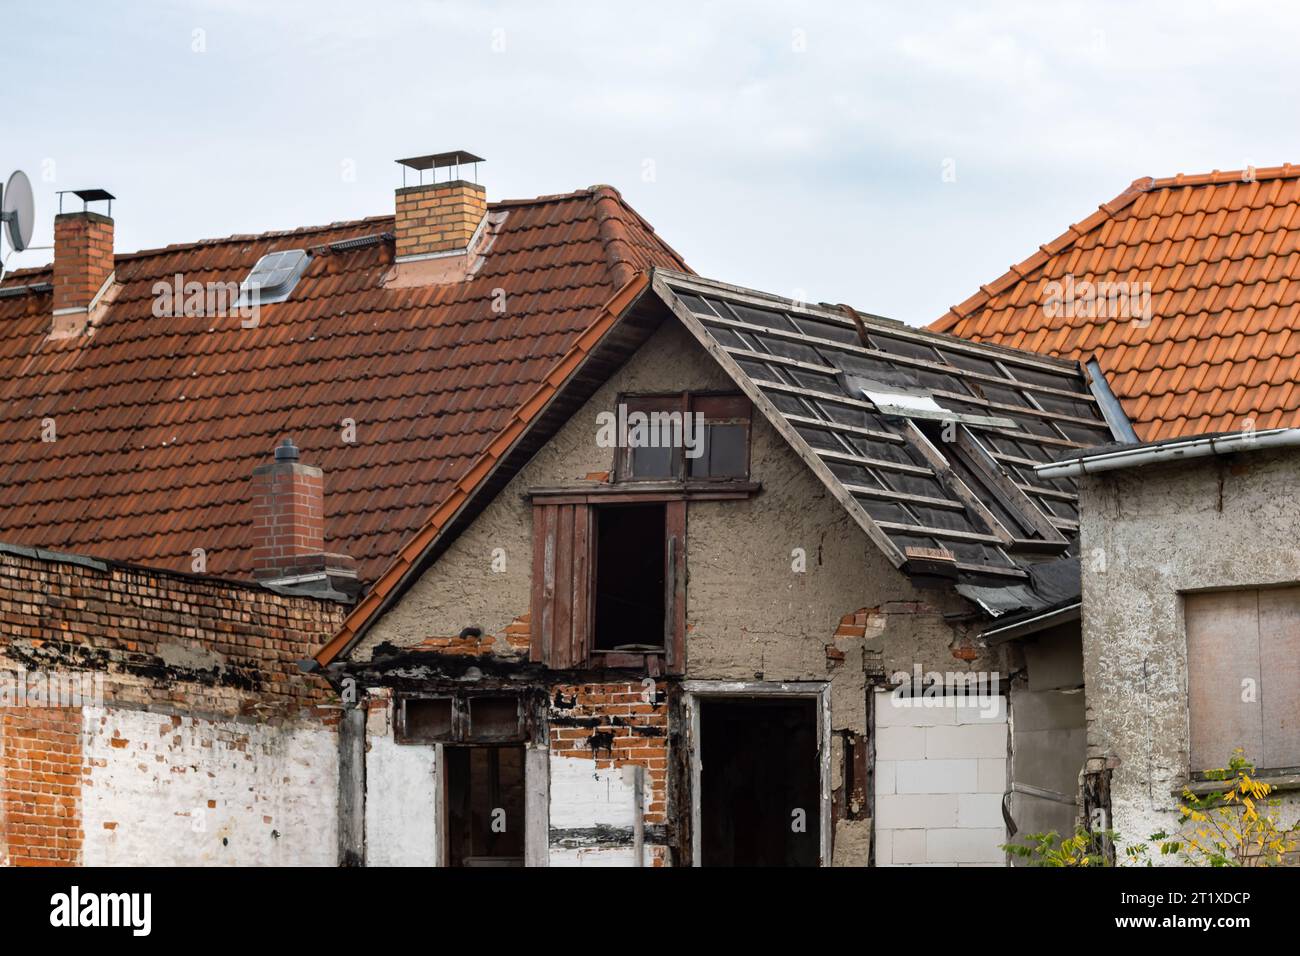 Ruined building in a German town. The abandoned house is very old and in bad condition. The windows and doors are damaged. The building is weak. Stock Photo